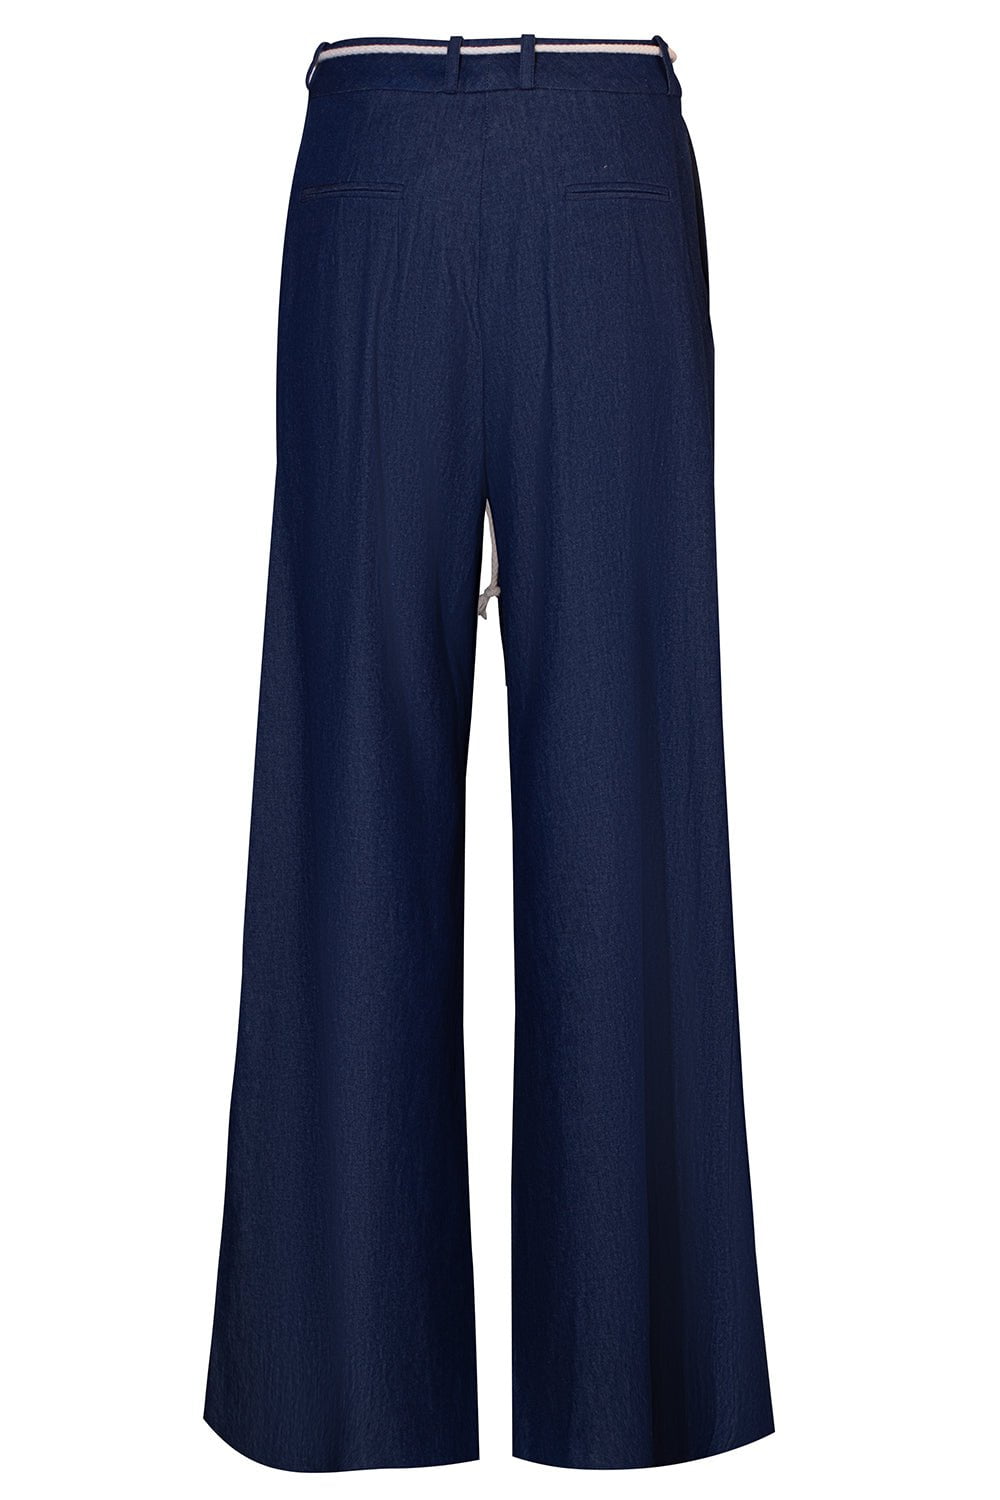 MIGUELINA-Ainsley Pant-